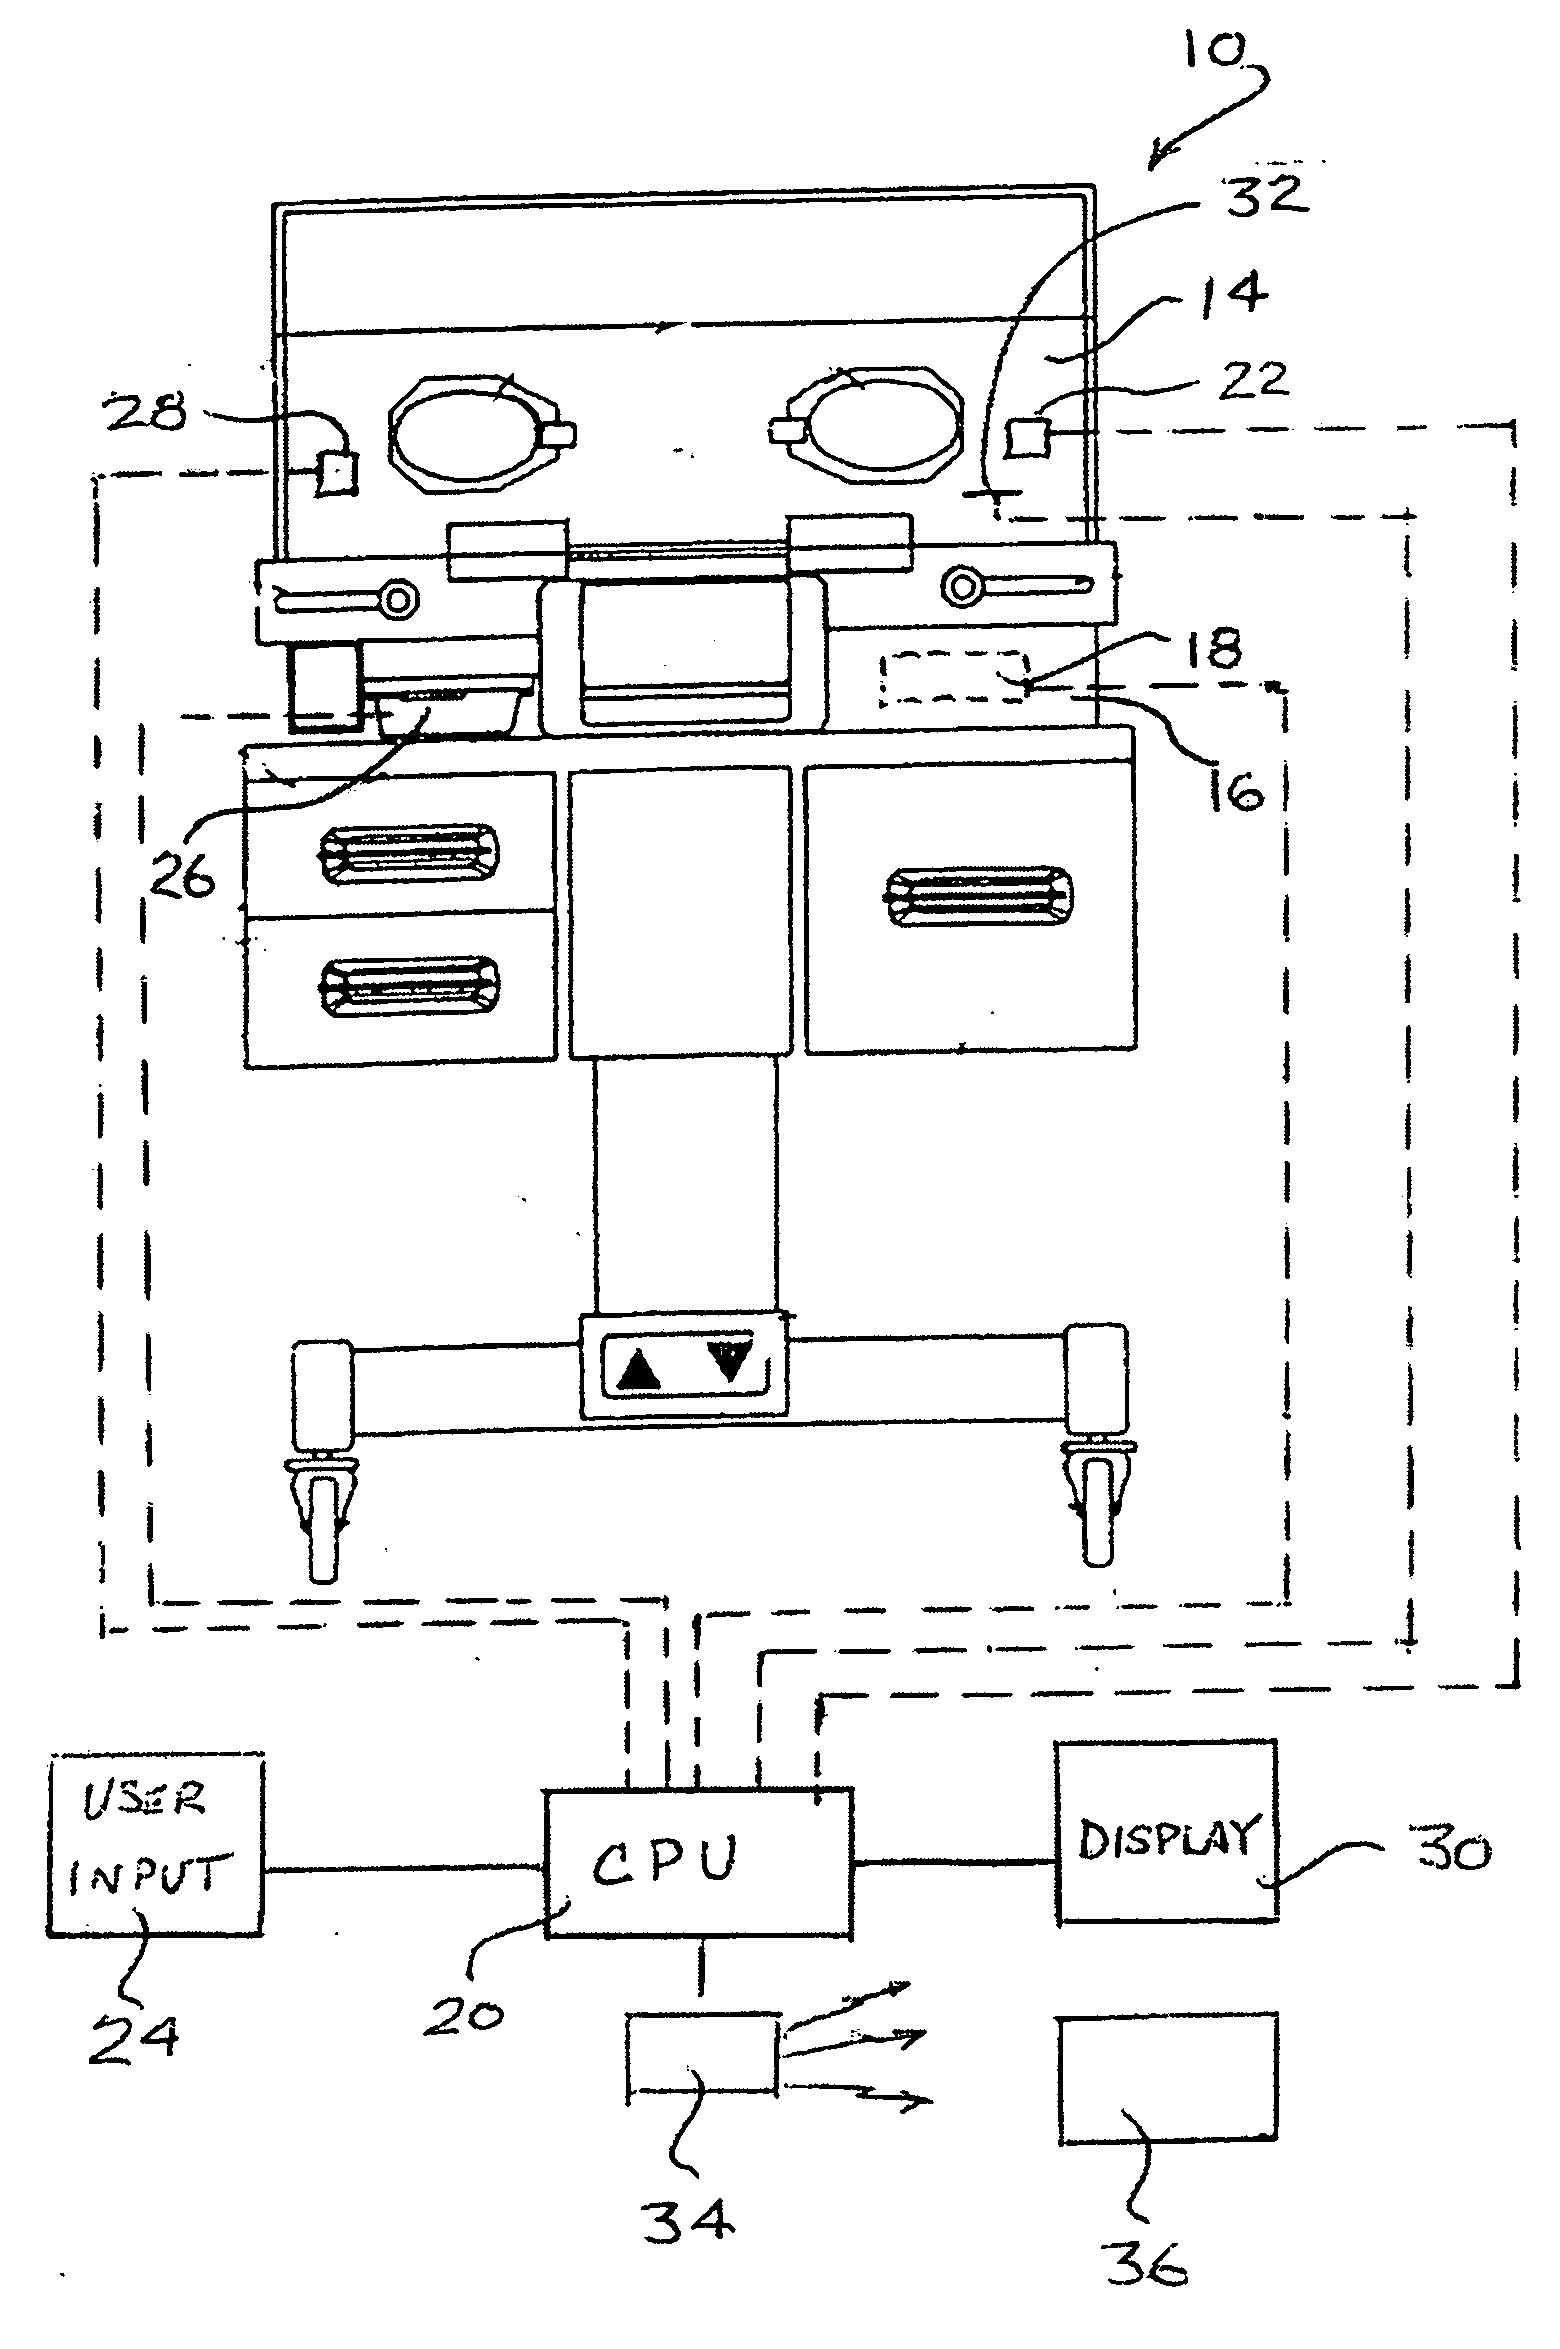 Humidification control system for infant care apparatus